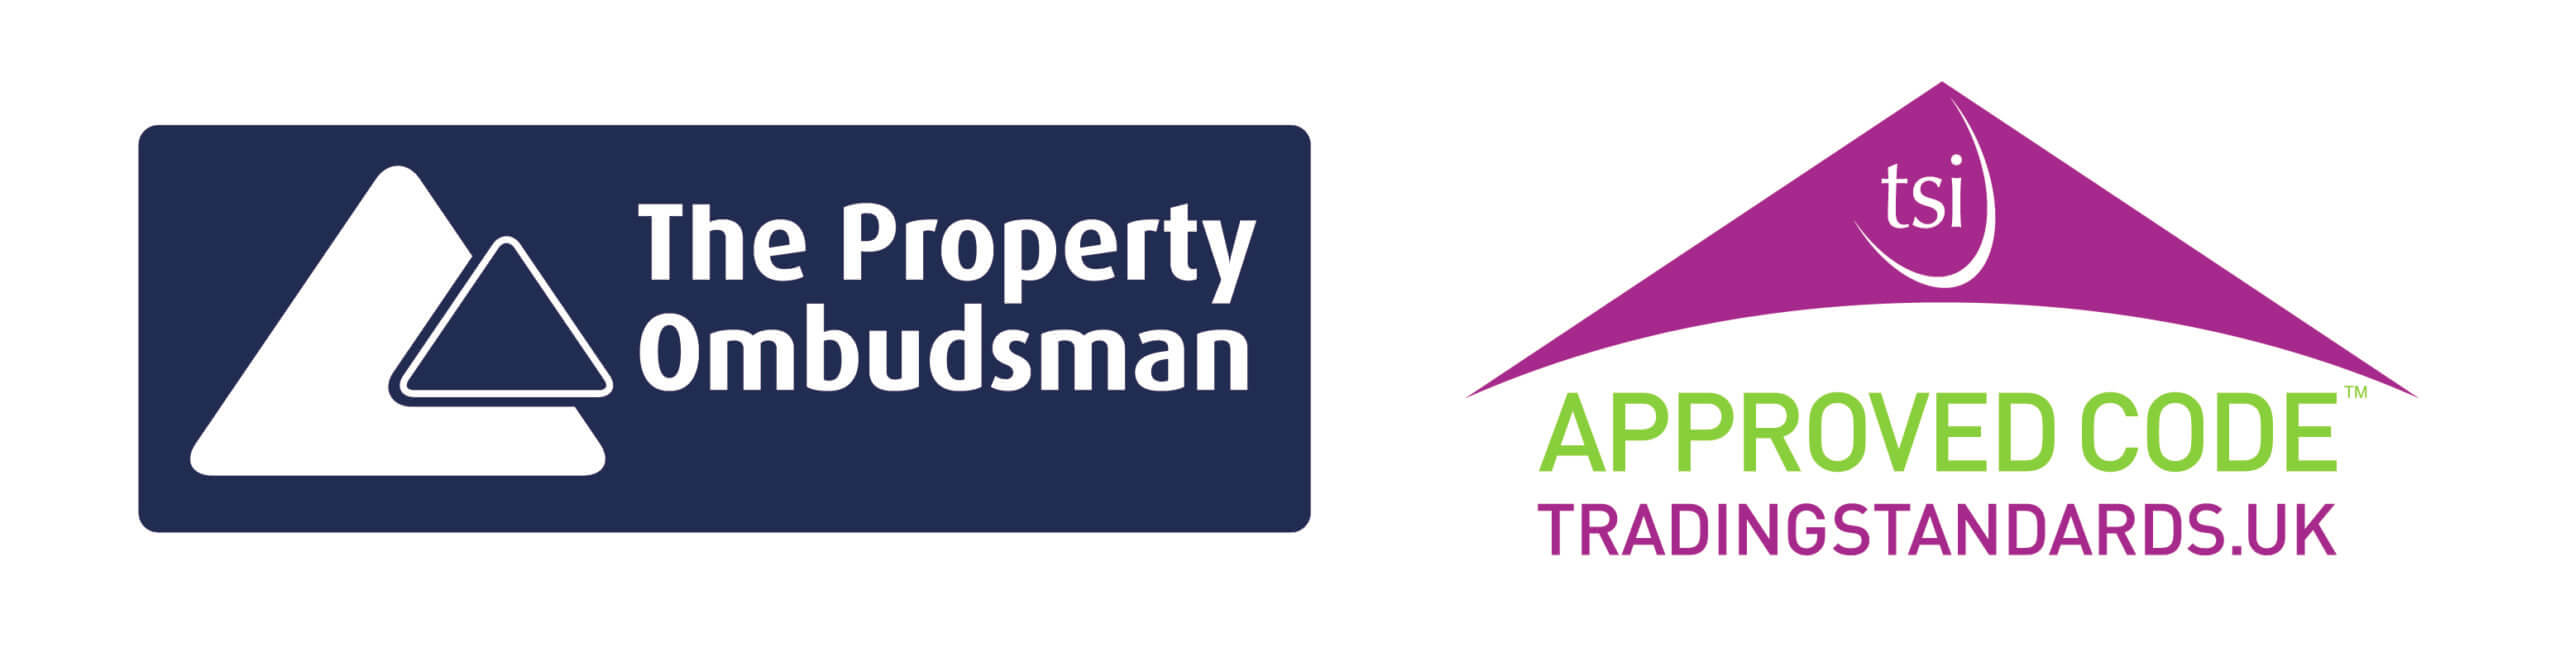 The Property Ombudsman and Trading Standards UK logos